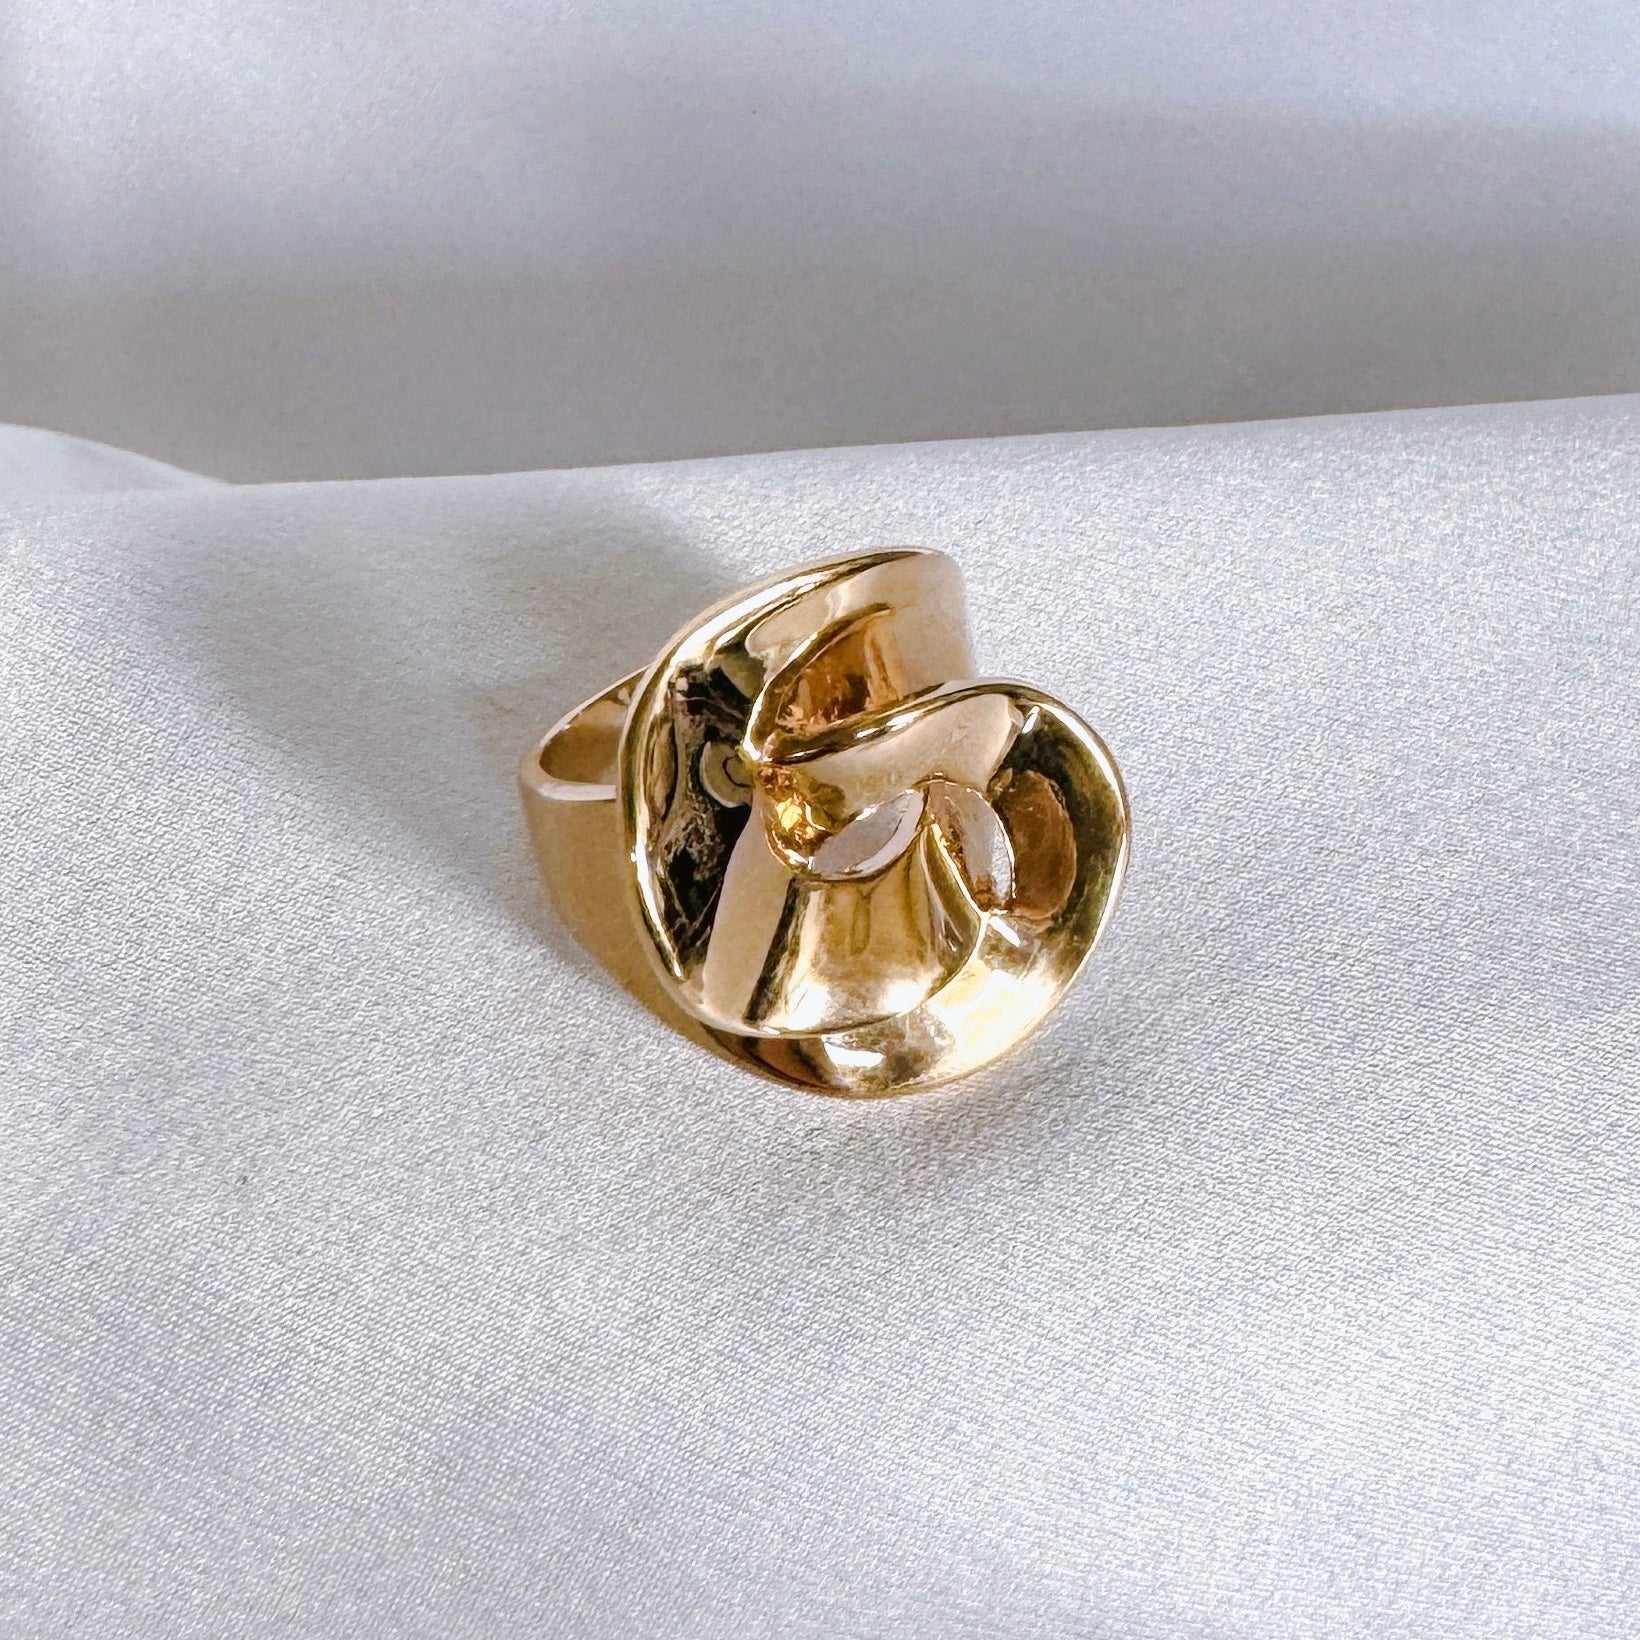 Gold-plated “Contemporary Interlaced” ring